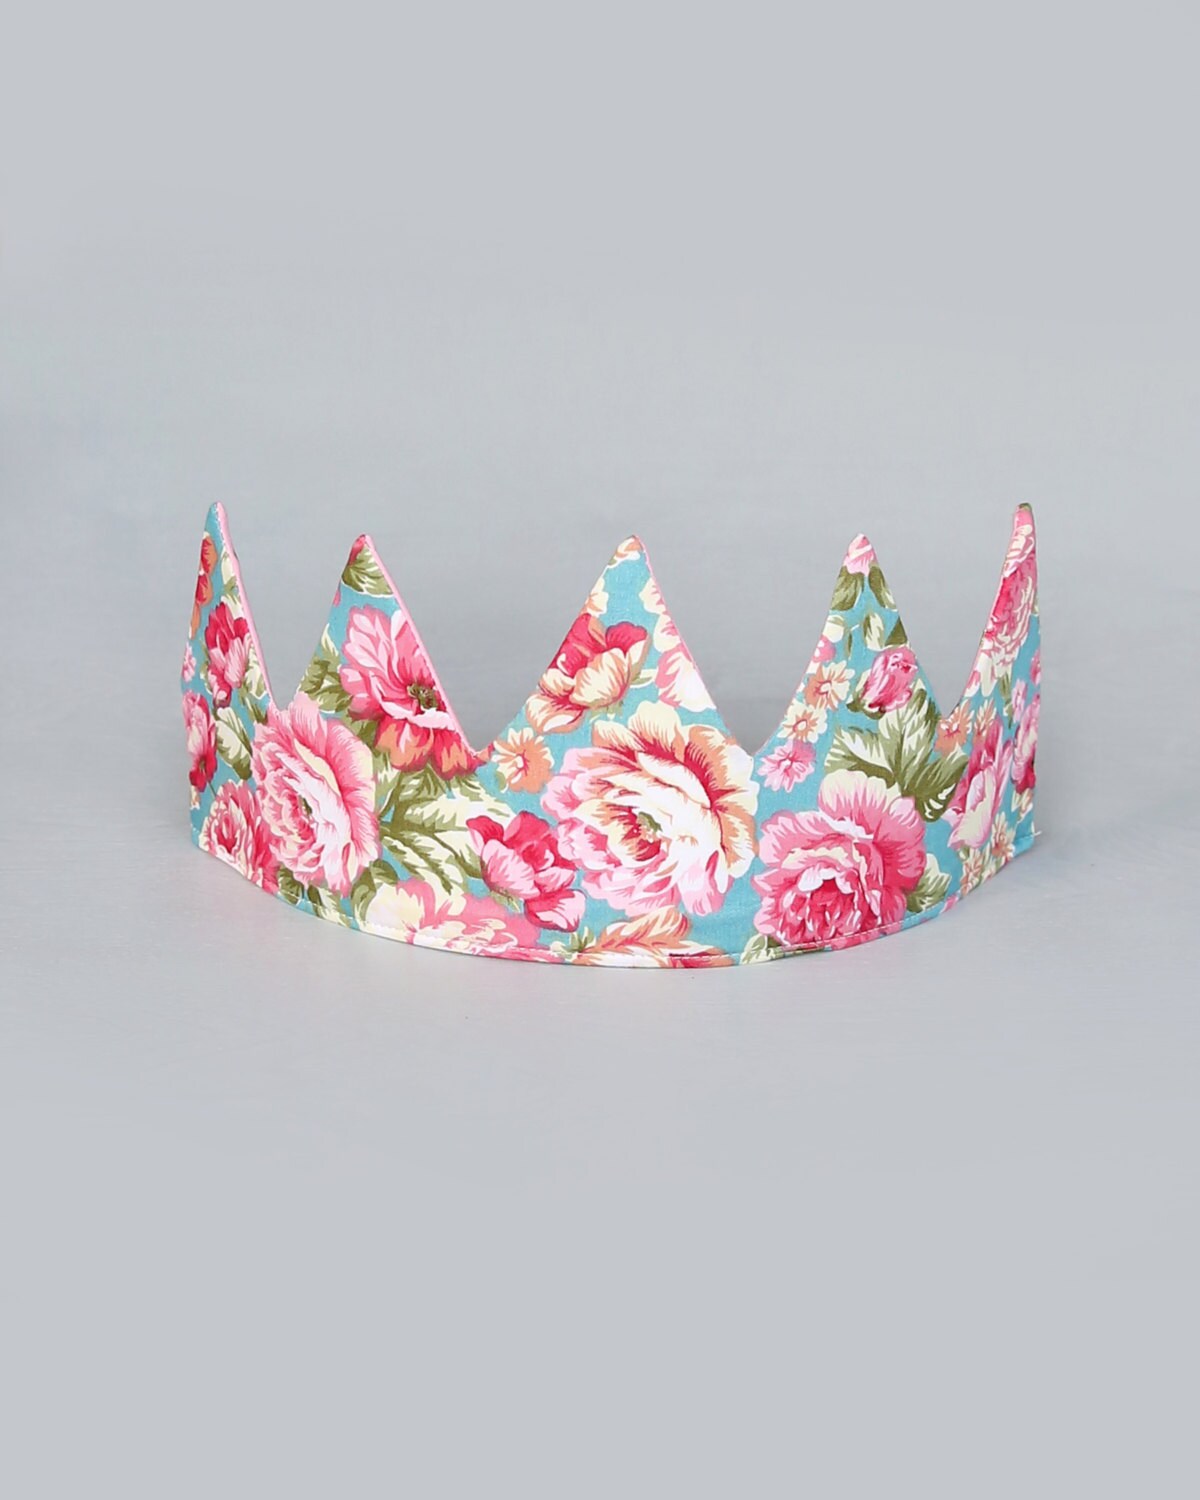 Dress Up Crown - Sequin Crown - Birthday Crown - Pink and Gold Polka Dot Crown Reverse Teal Floral - Fits all